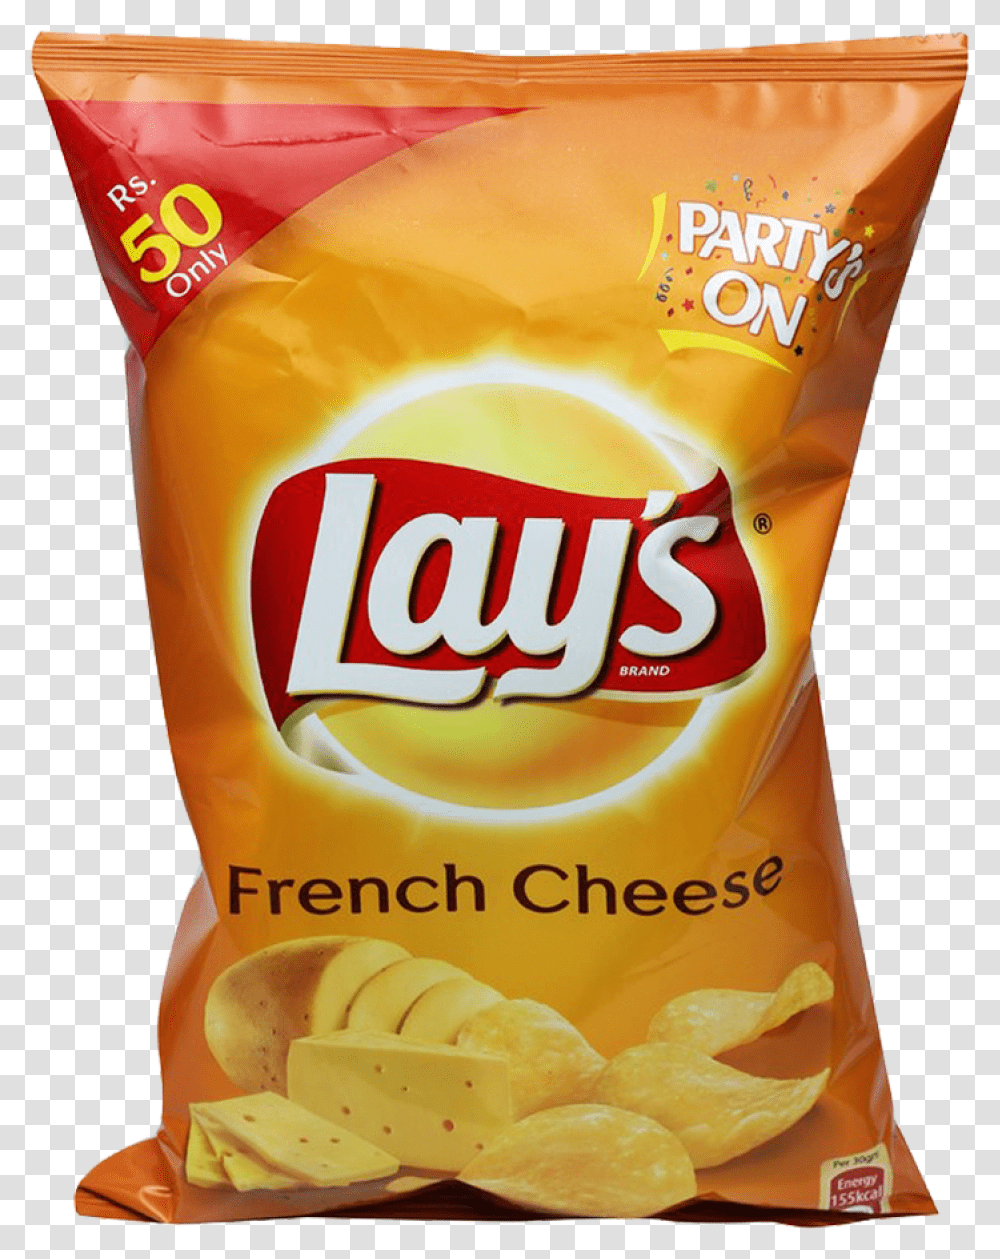 Lays Chips French Cheese 70 Gm Lays Yogurt And Herb, Food, Snack, Ketchup, Mayonnaise Transparent Png